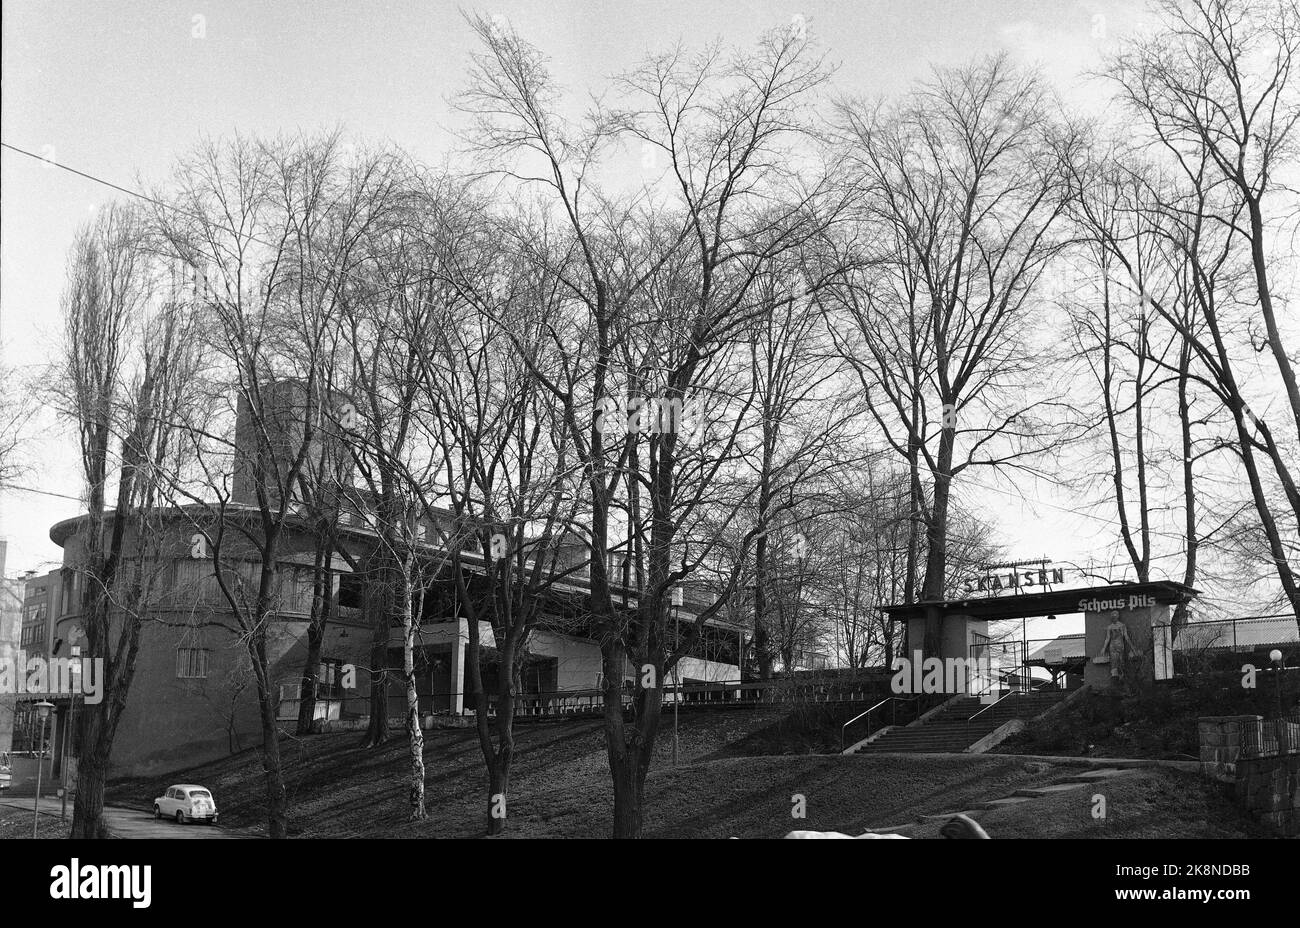 Oslo 21.04.1970. Restaurant Skansen, Norway's first funk building. Architect: Lars Backer. Listed in 1927, demolished in 1970. The youth restaurant 'Rondo' from 1962-1967. (TV. Rondo, th. Skansen) Stock Photo: NTB / NTB Stock Photo